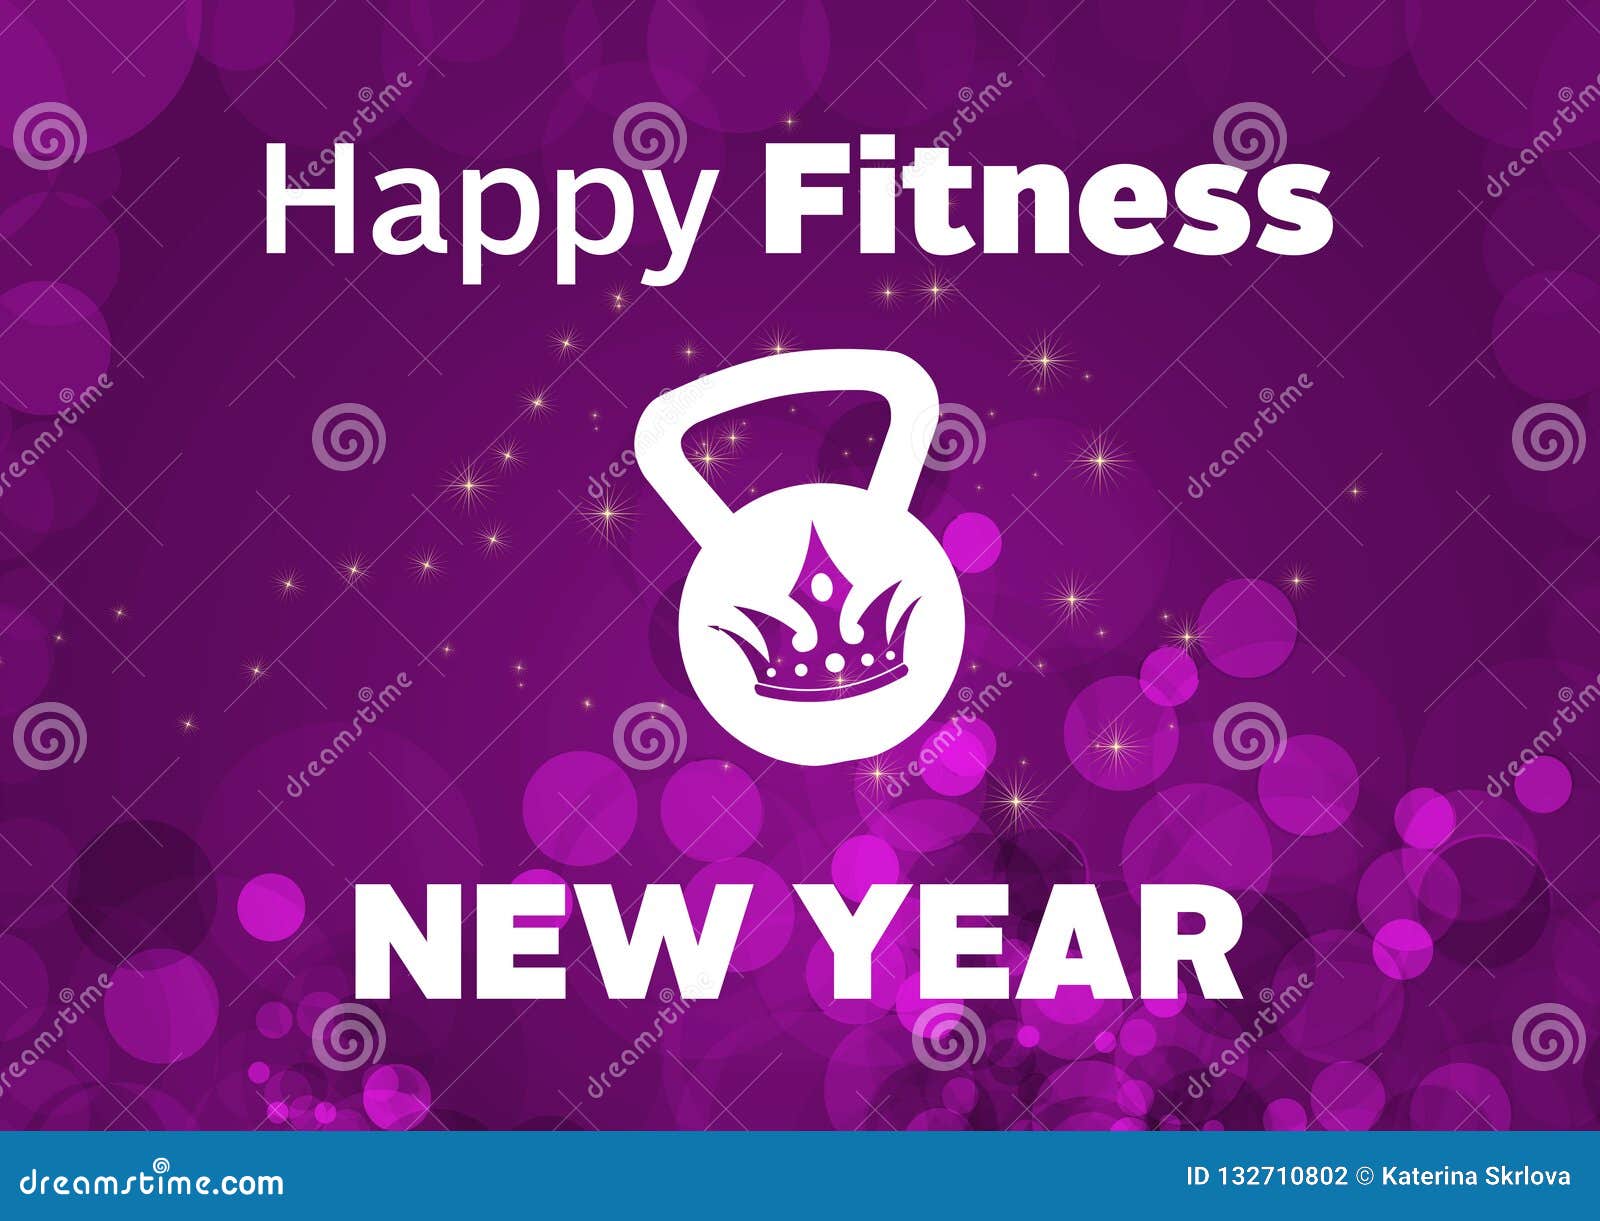 Christmas Fitness and Gym Motivation Quote Stock Illustration